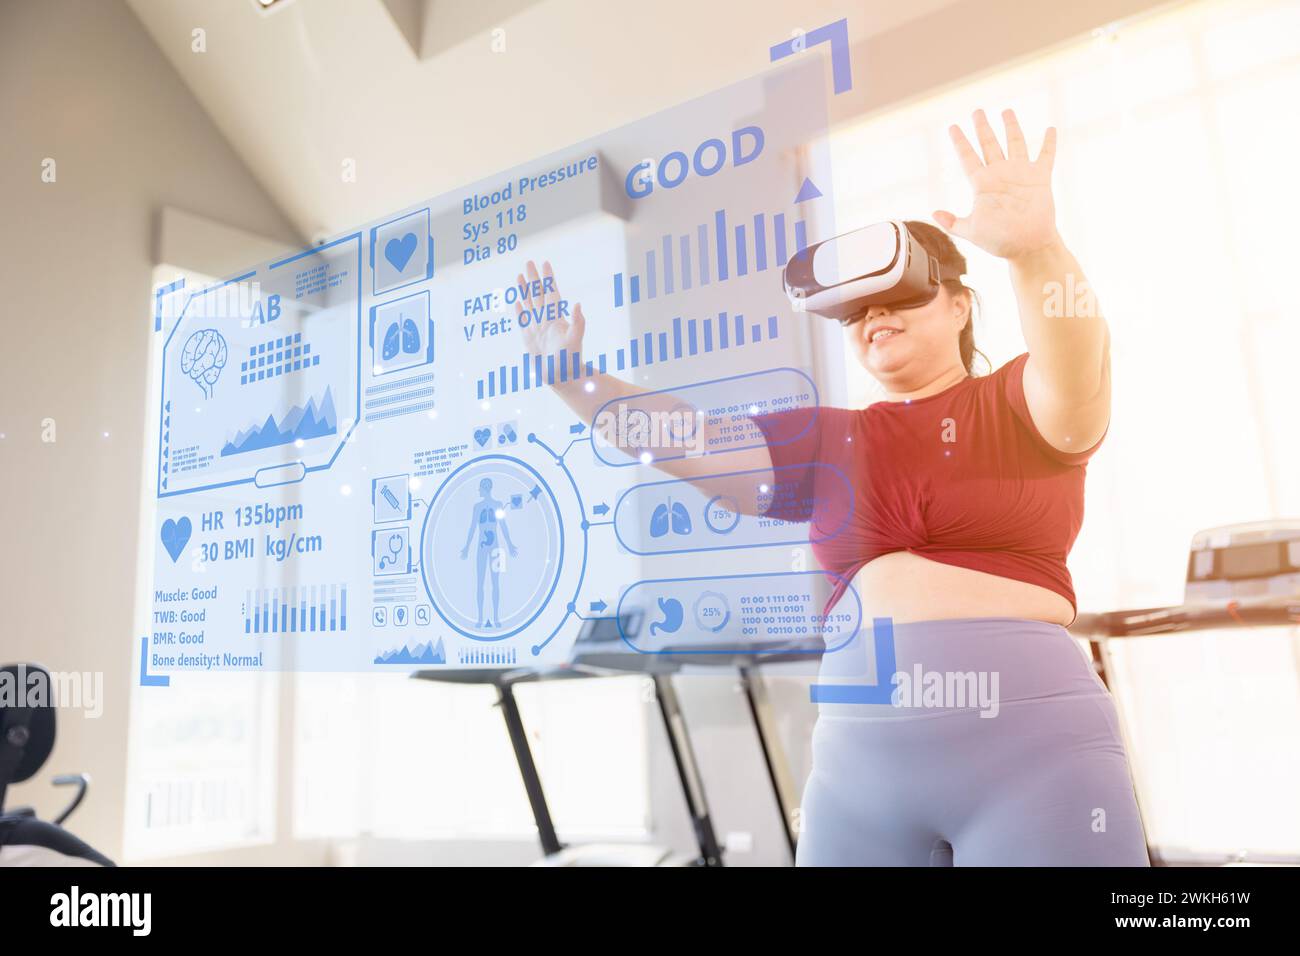 fat women using smart health information VR headset showing overlay body info data fitness statistic hologram technology device Stock Photo